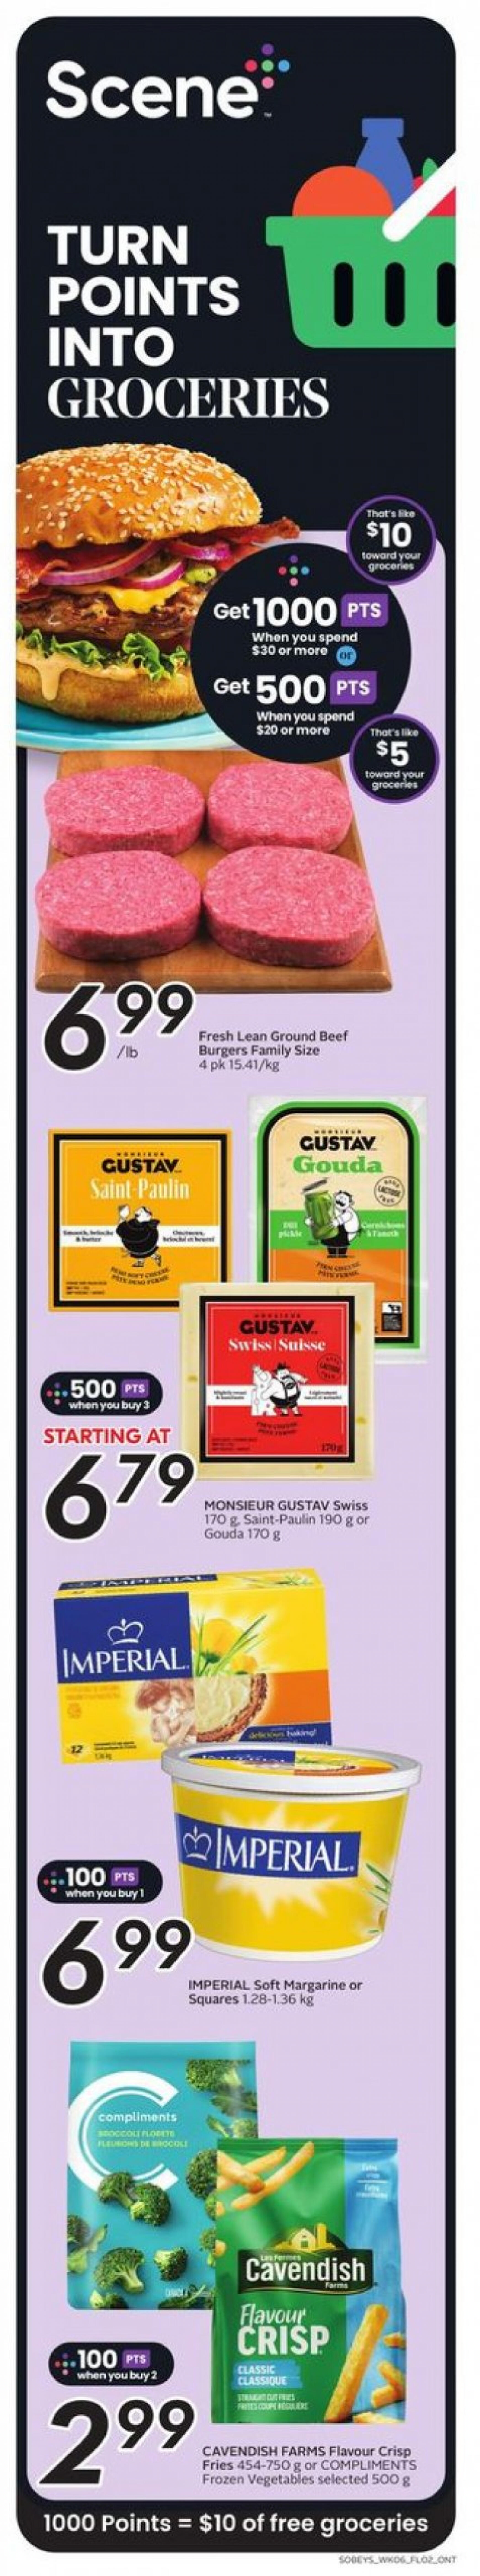 sobeys - Sobeys - Weekly Flyer - Ontario flyer current 06.06. - 12.06. - page: 3